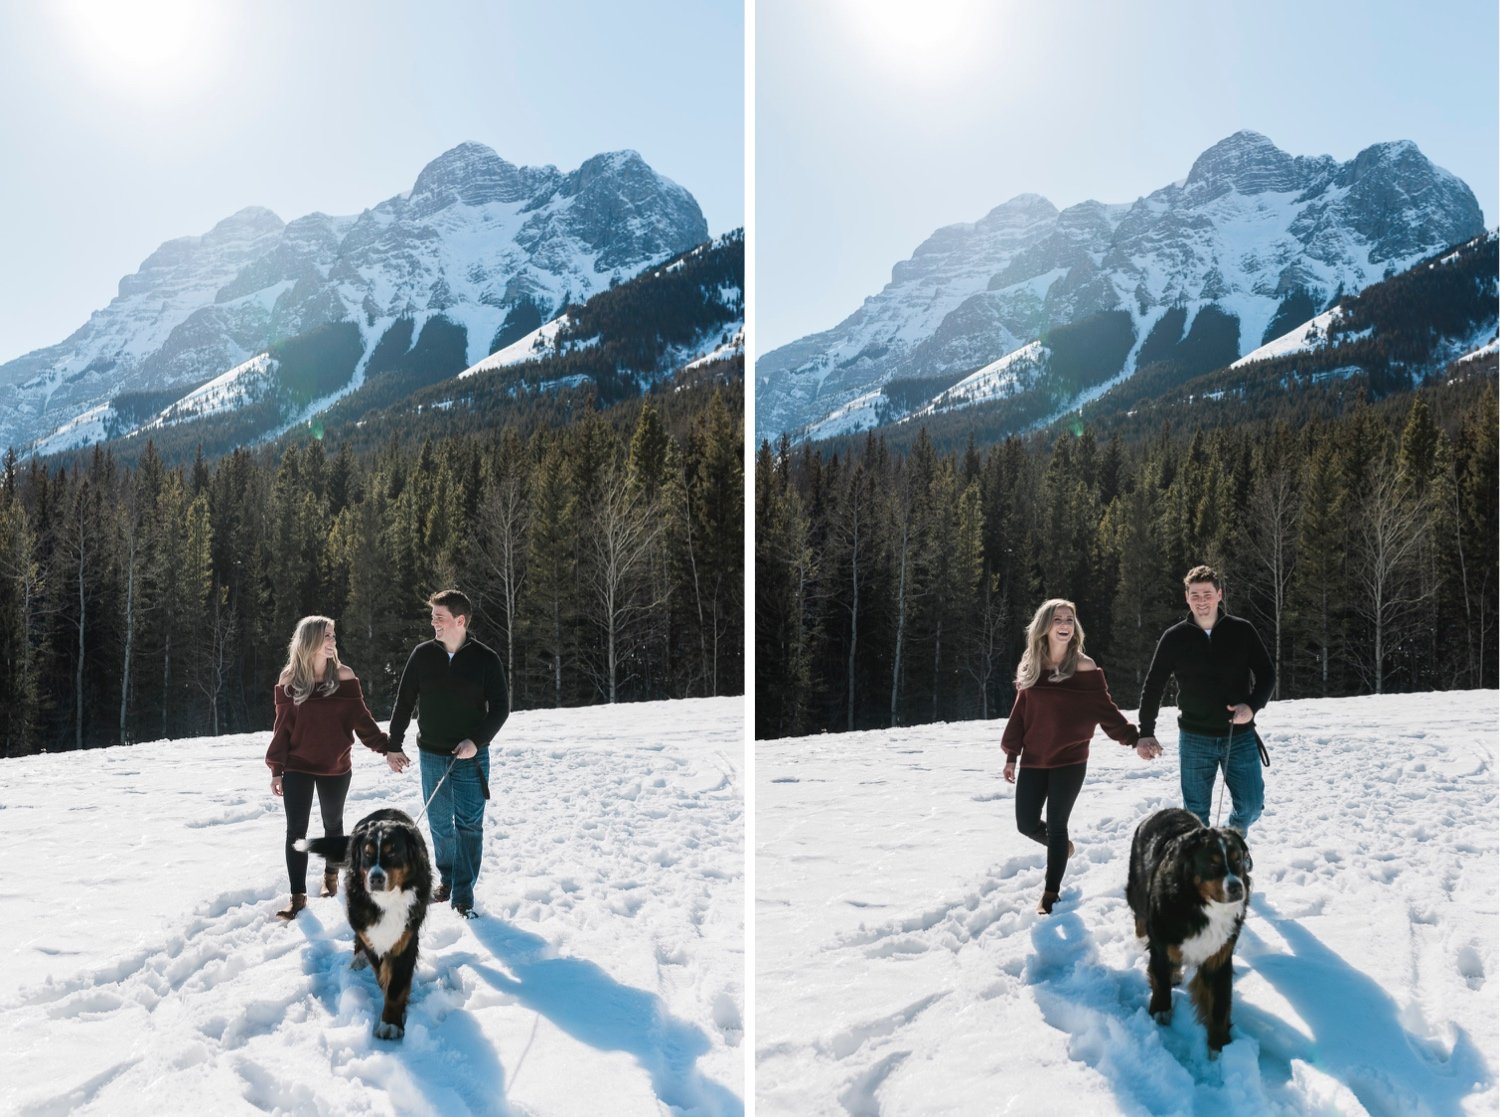 05_sunlight_landscape_Kananaskis_Canmore_Banff_trees_couple_engagement_close_simple_dog_cuddle_kiss_golden_hour_intimate_nature_mountains_fiancee_spring_winter_delicate_ice_bride_snow_soft_Calgary_Alberta_photographer_forest_groom_outdoor.jpg